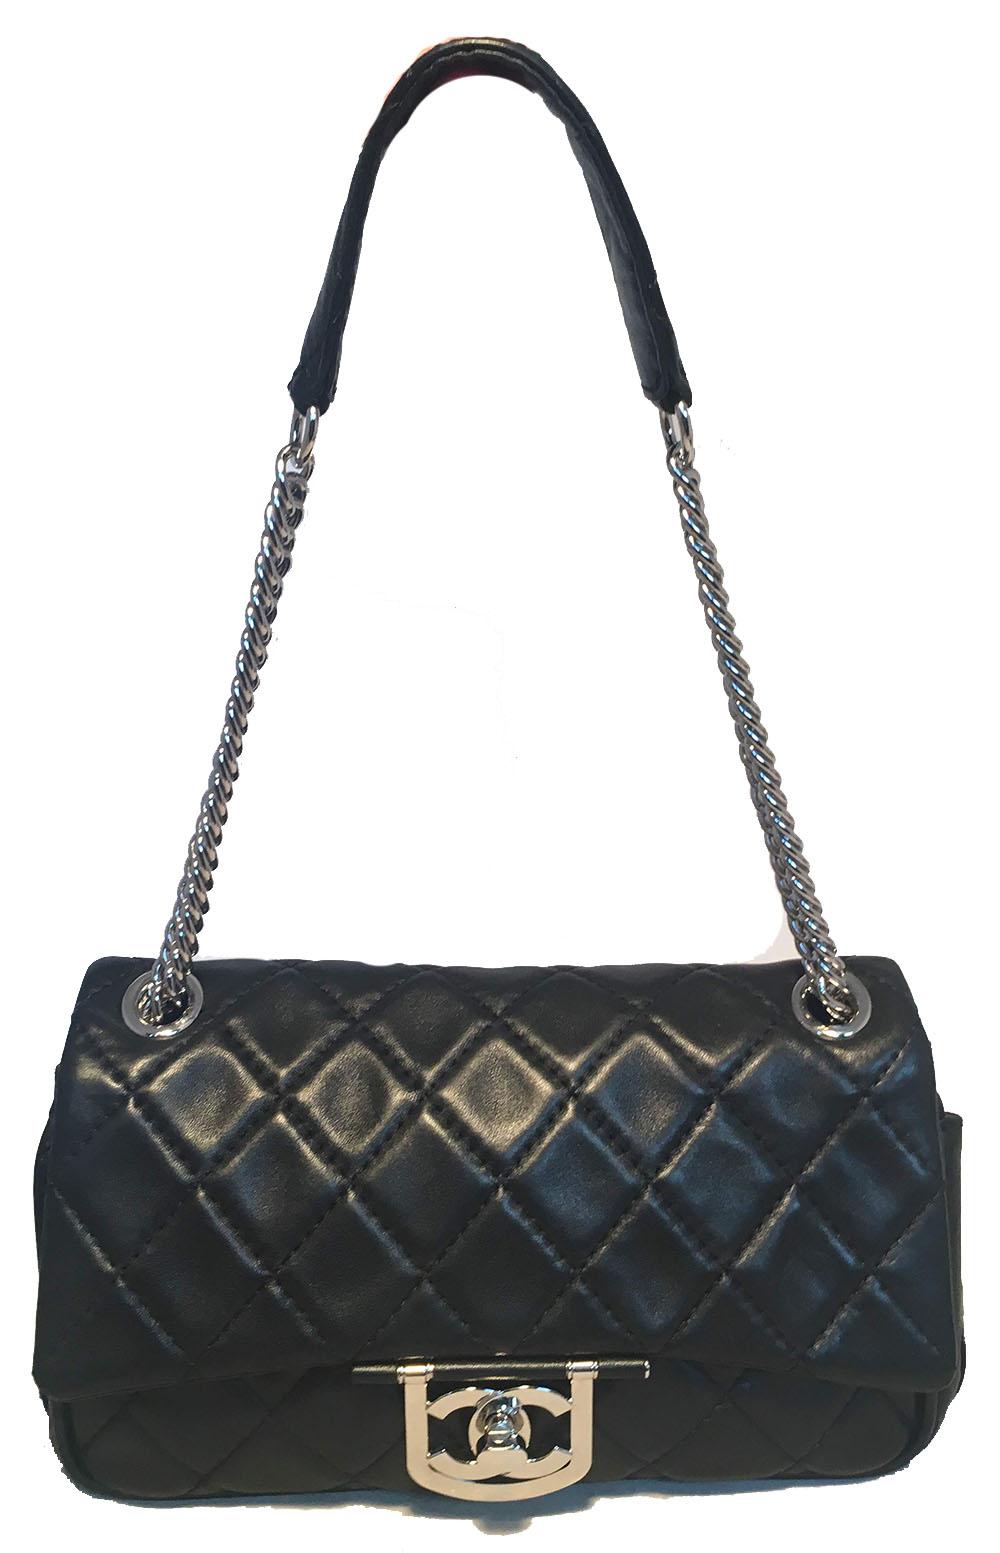 GORGEOUS Chanel Black Leather Classic Flap with Chain Strap Shoulder Bag in excellent condition. Black lambskin leather exterior trimmed with silver hardware. Multiple chain and leather shoulder strap. Unique exterior leather strap design surrounds